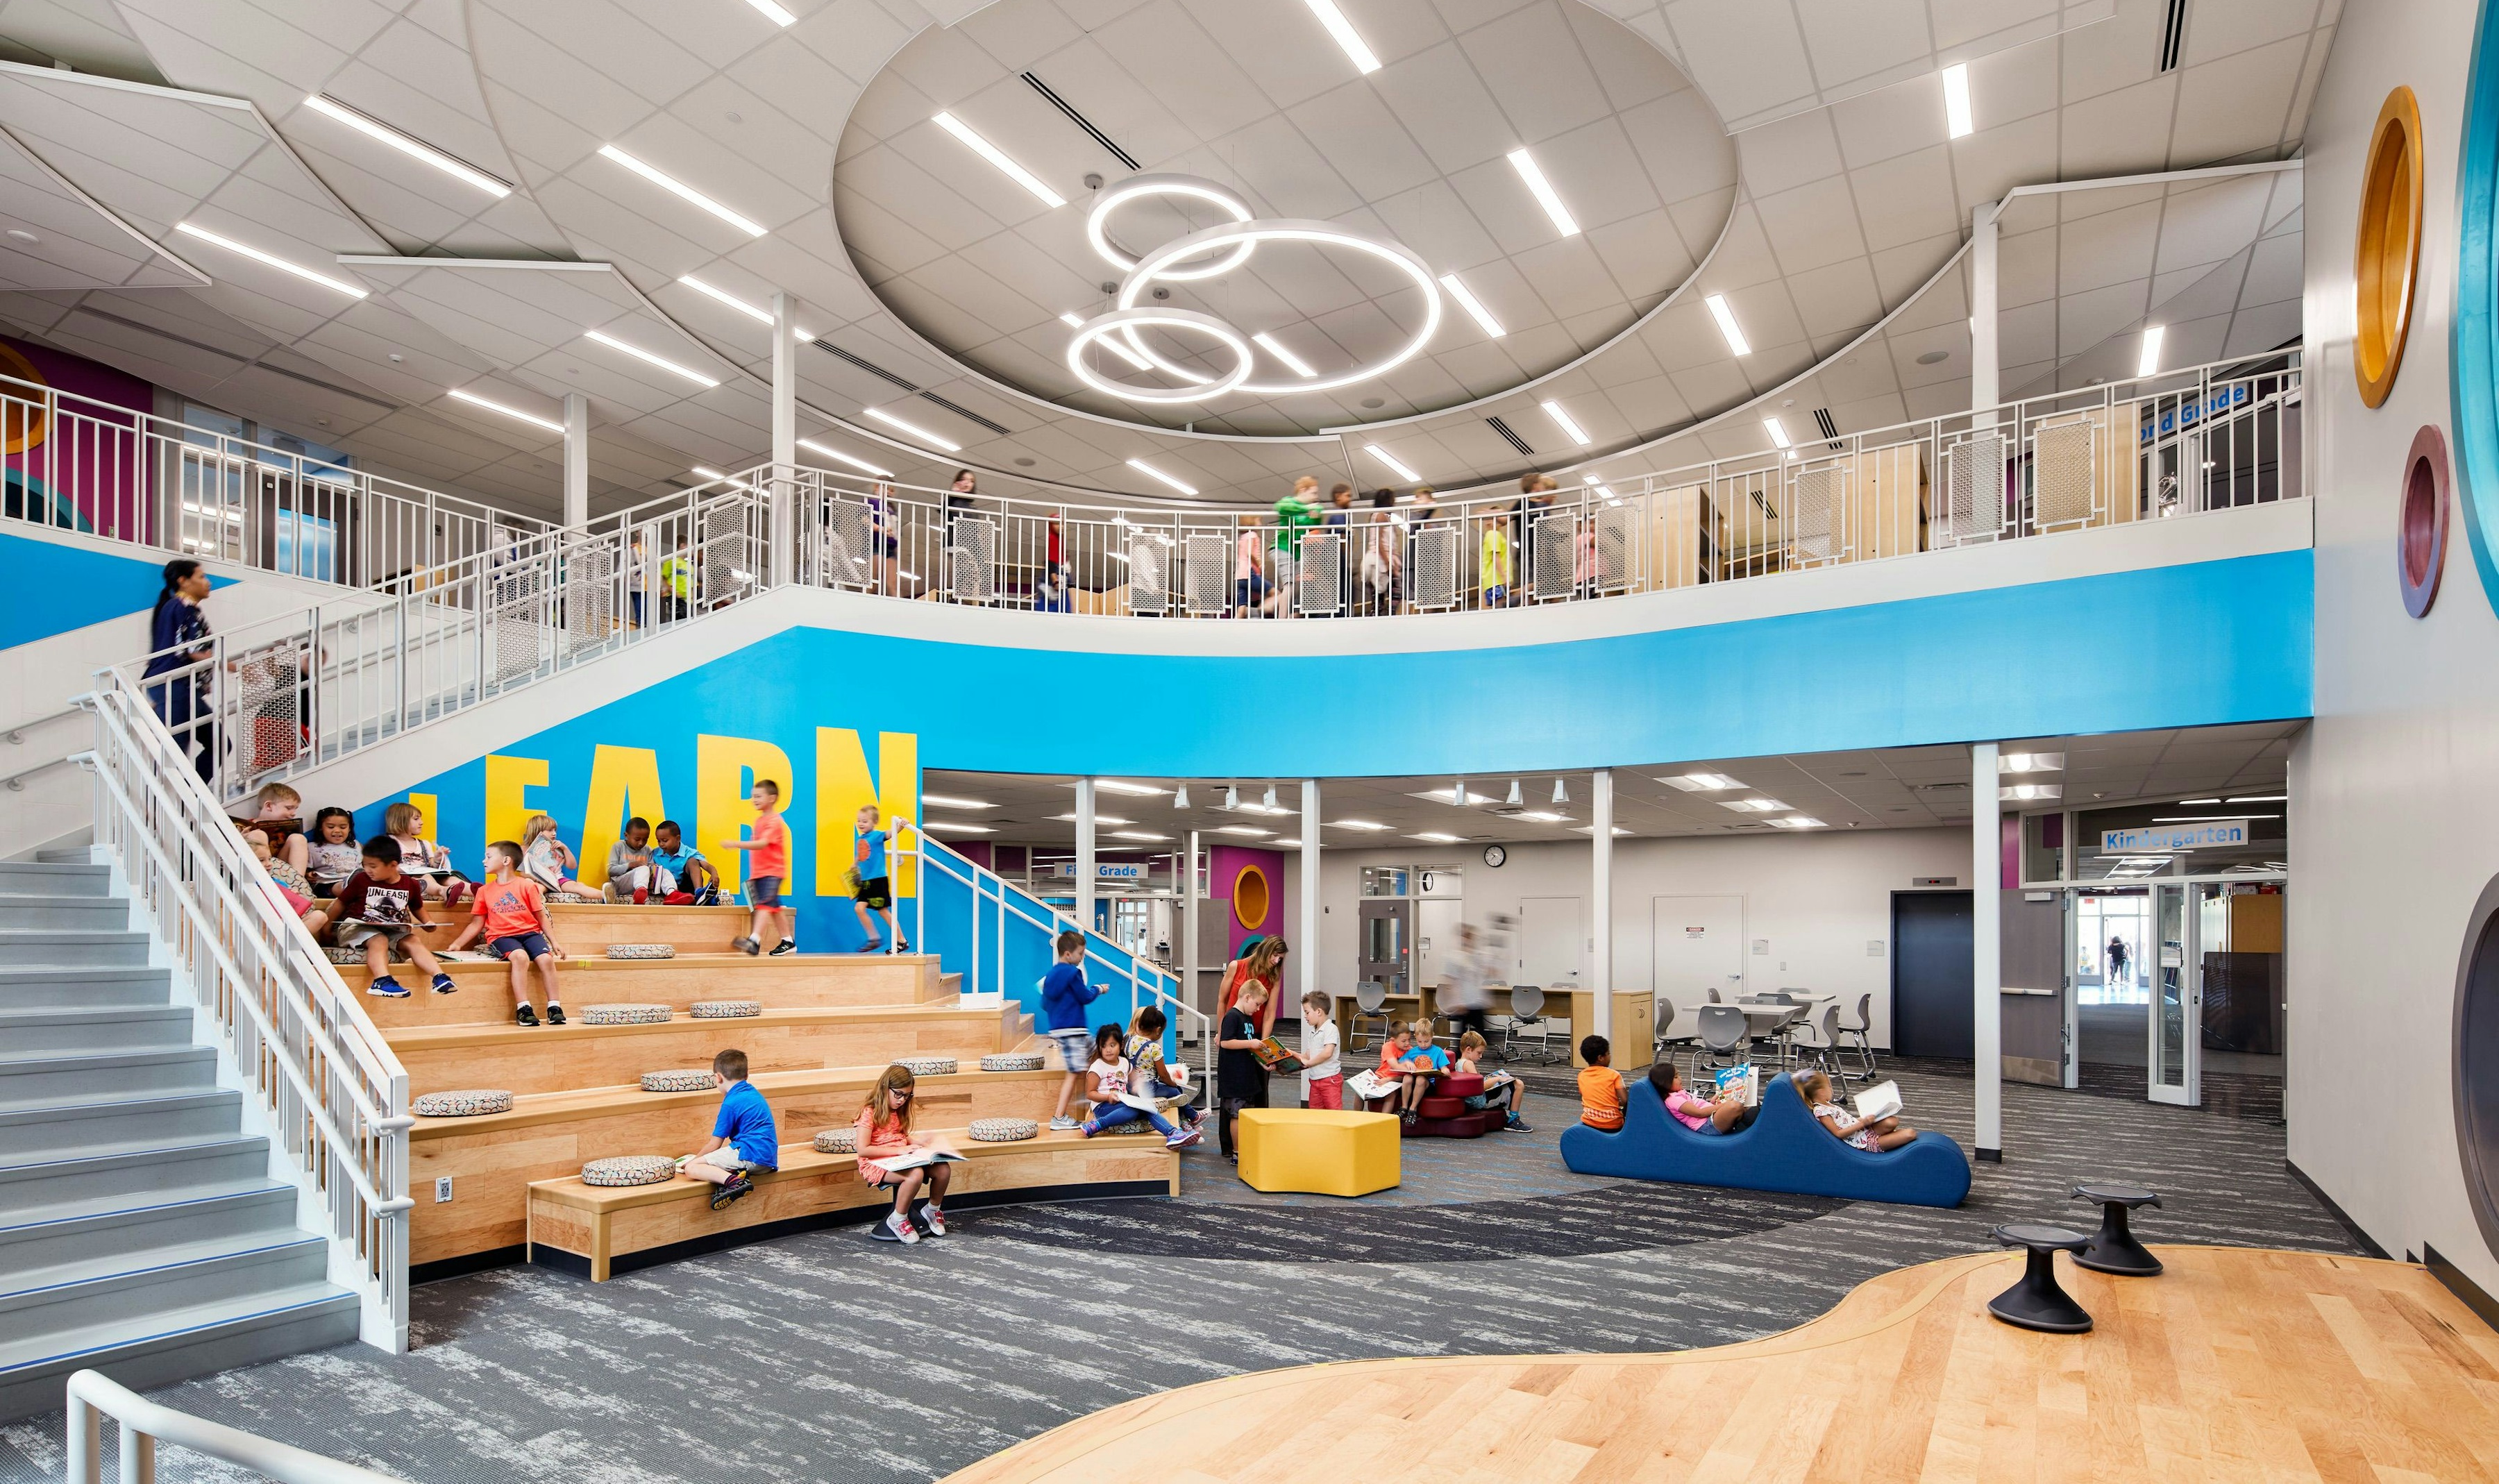 Wold Architects & Engineers - Elementary Classroom Design